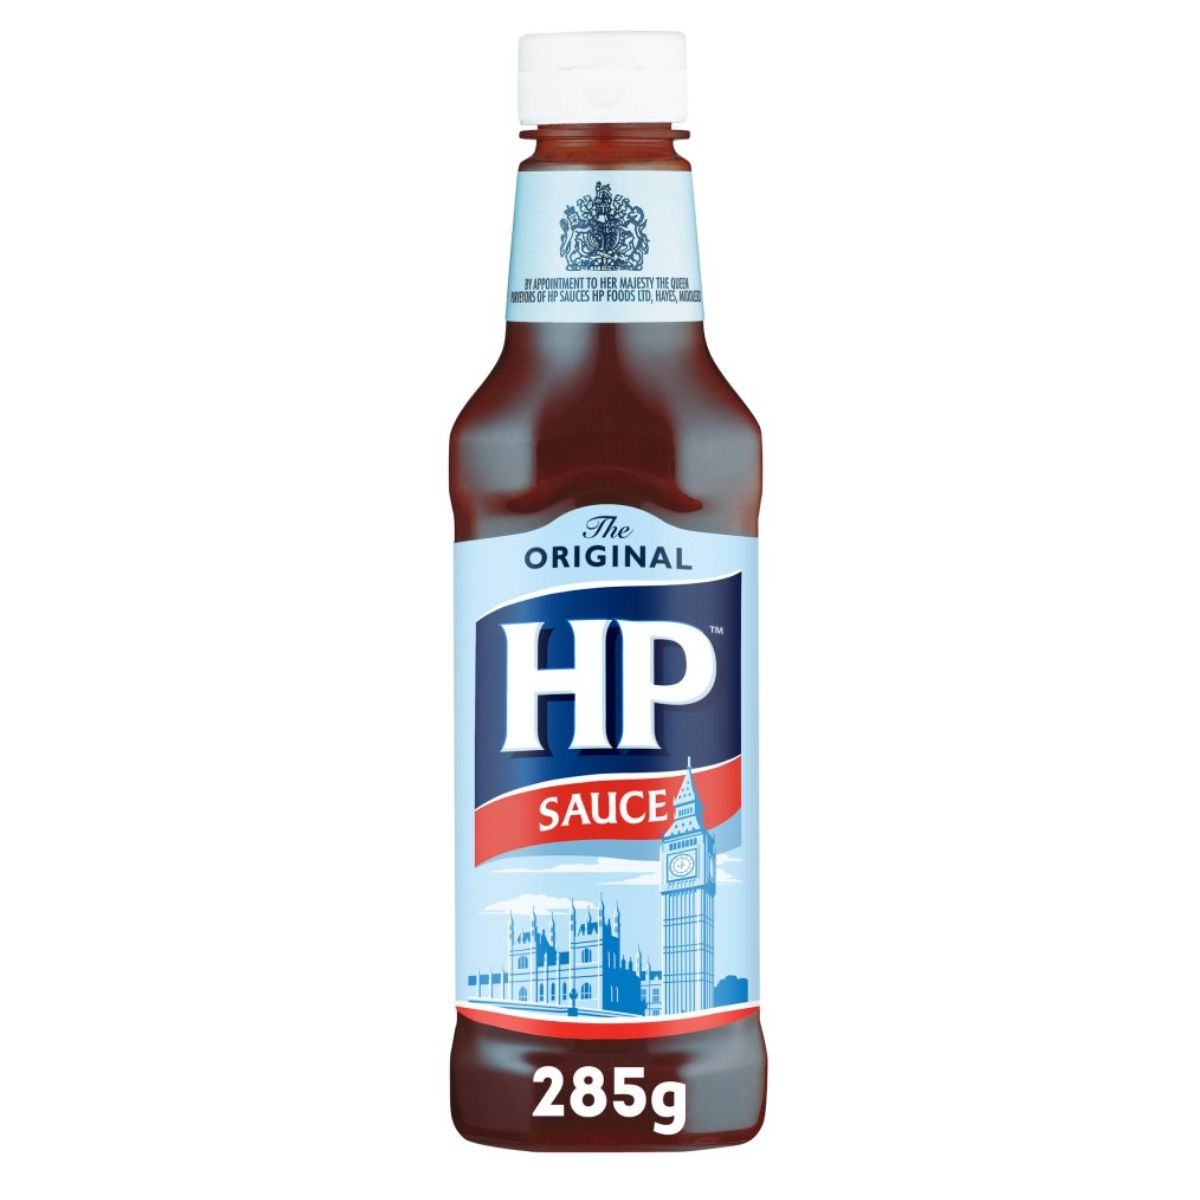 Bottle of the HP - Brown Sauce - 285g.